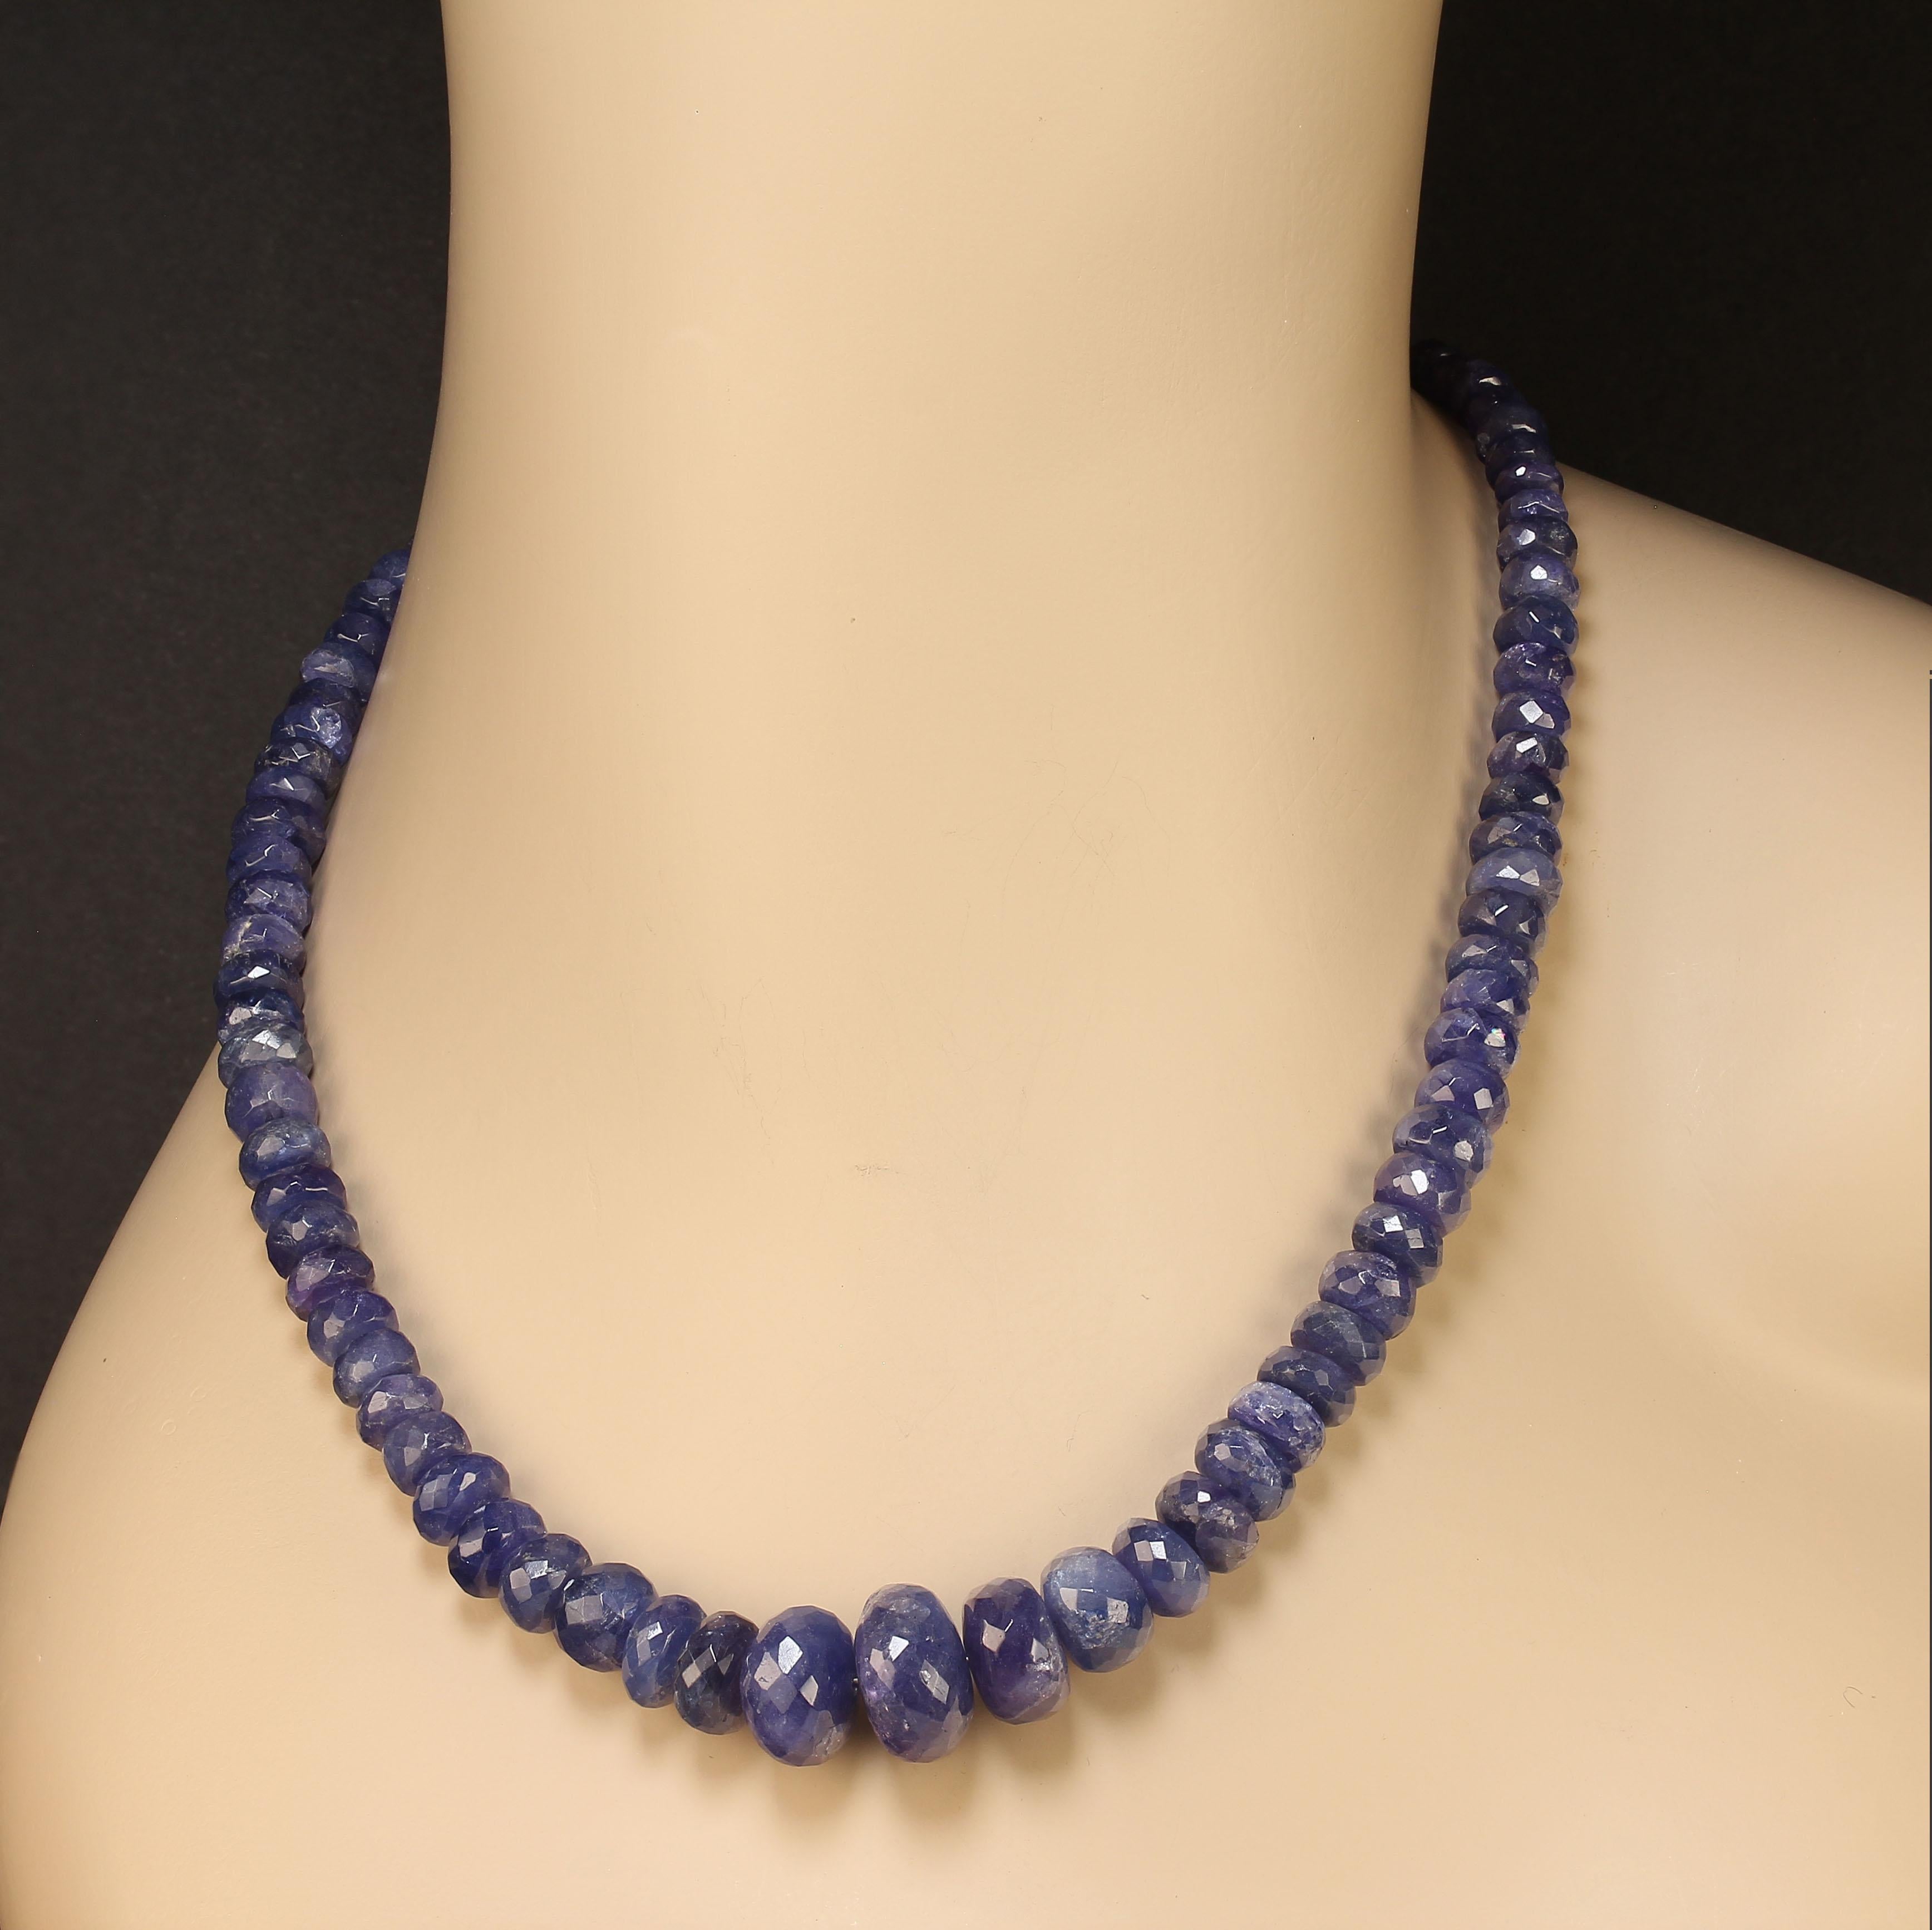 Artisan Terrific Tanzanite necklace graduated 23 inch purple/blue rondelles Great Gift! For Sale